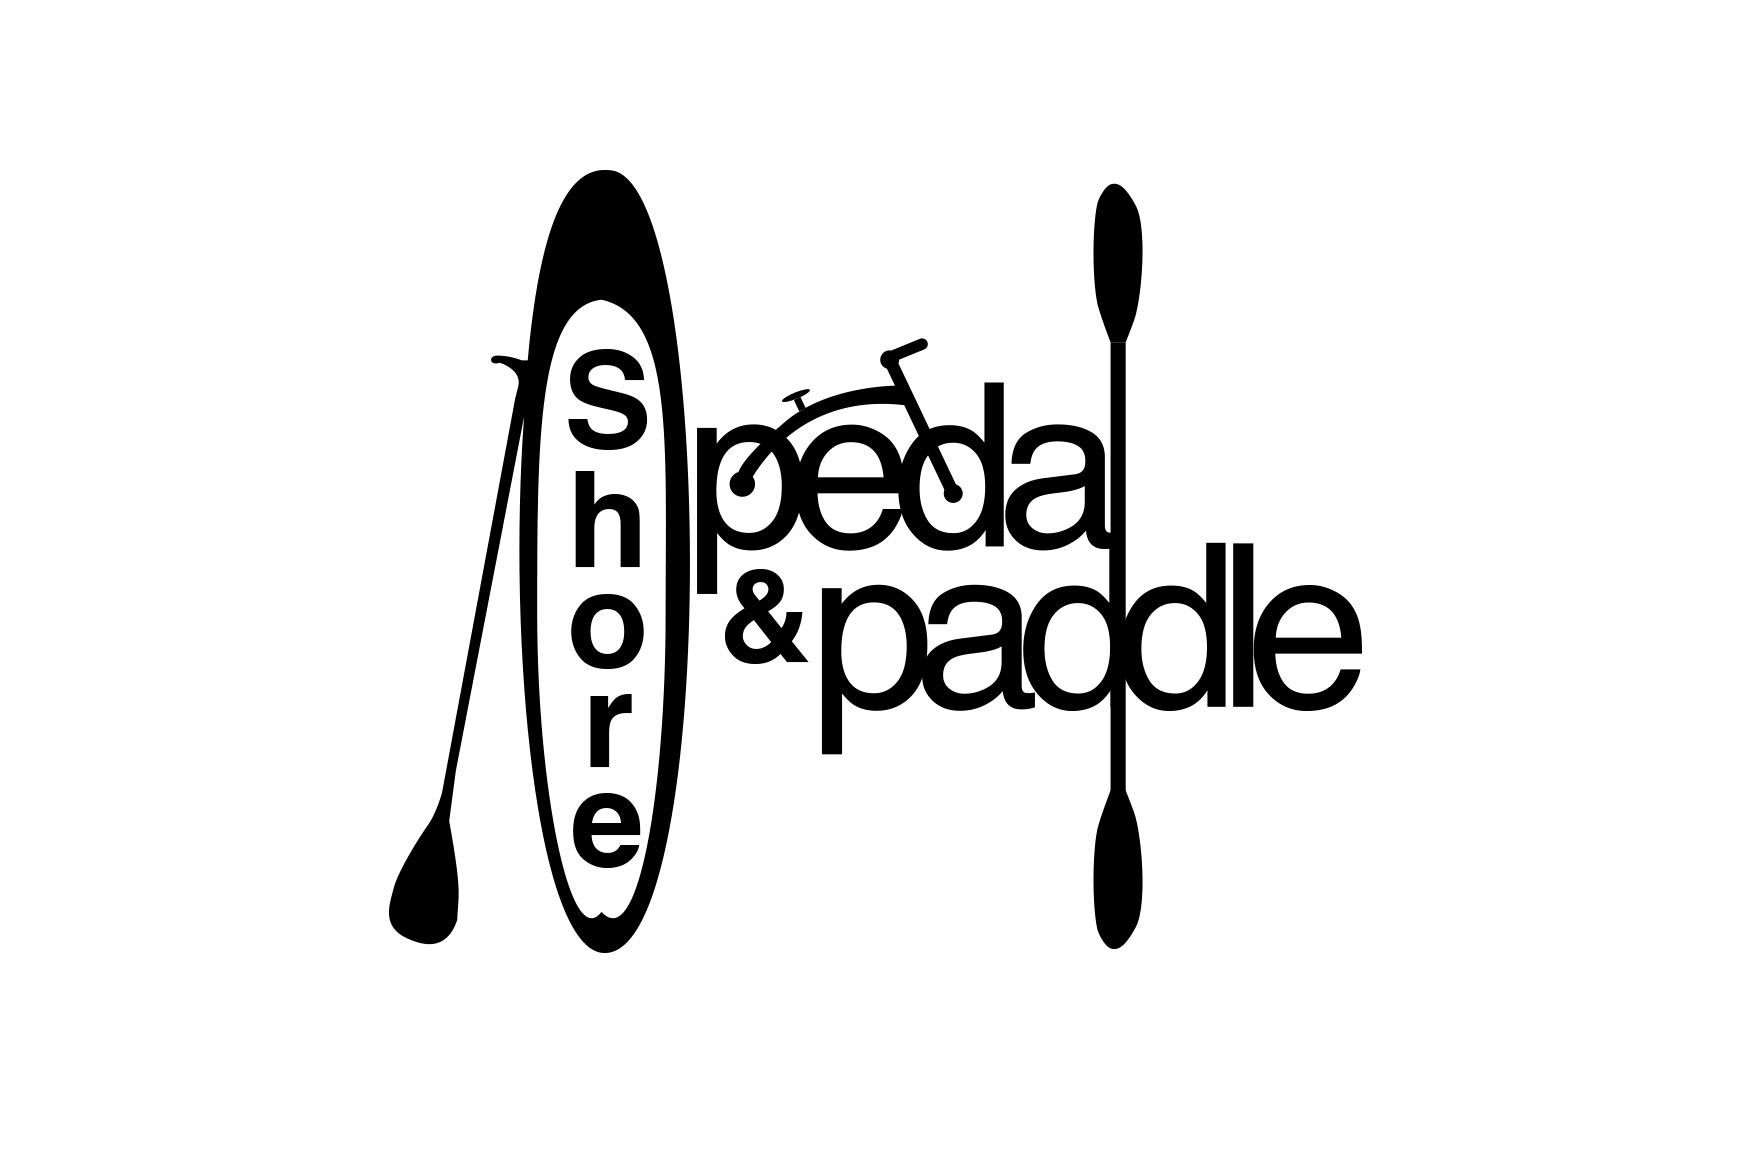 Logo Design & Branding | Shore Pedal & Paddle by Rockfish Media | Maryland Businesses | Branding your business